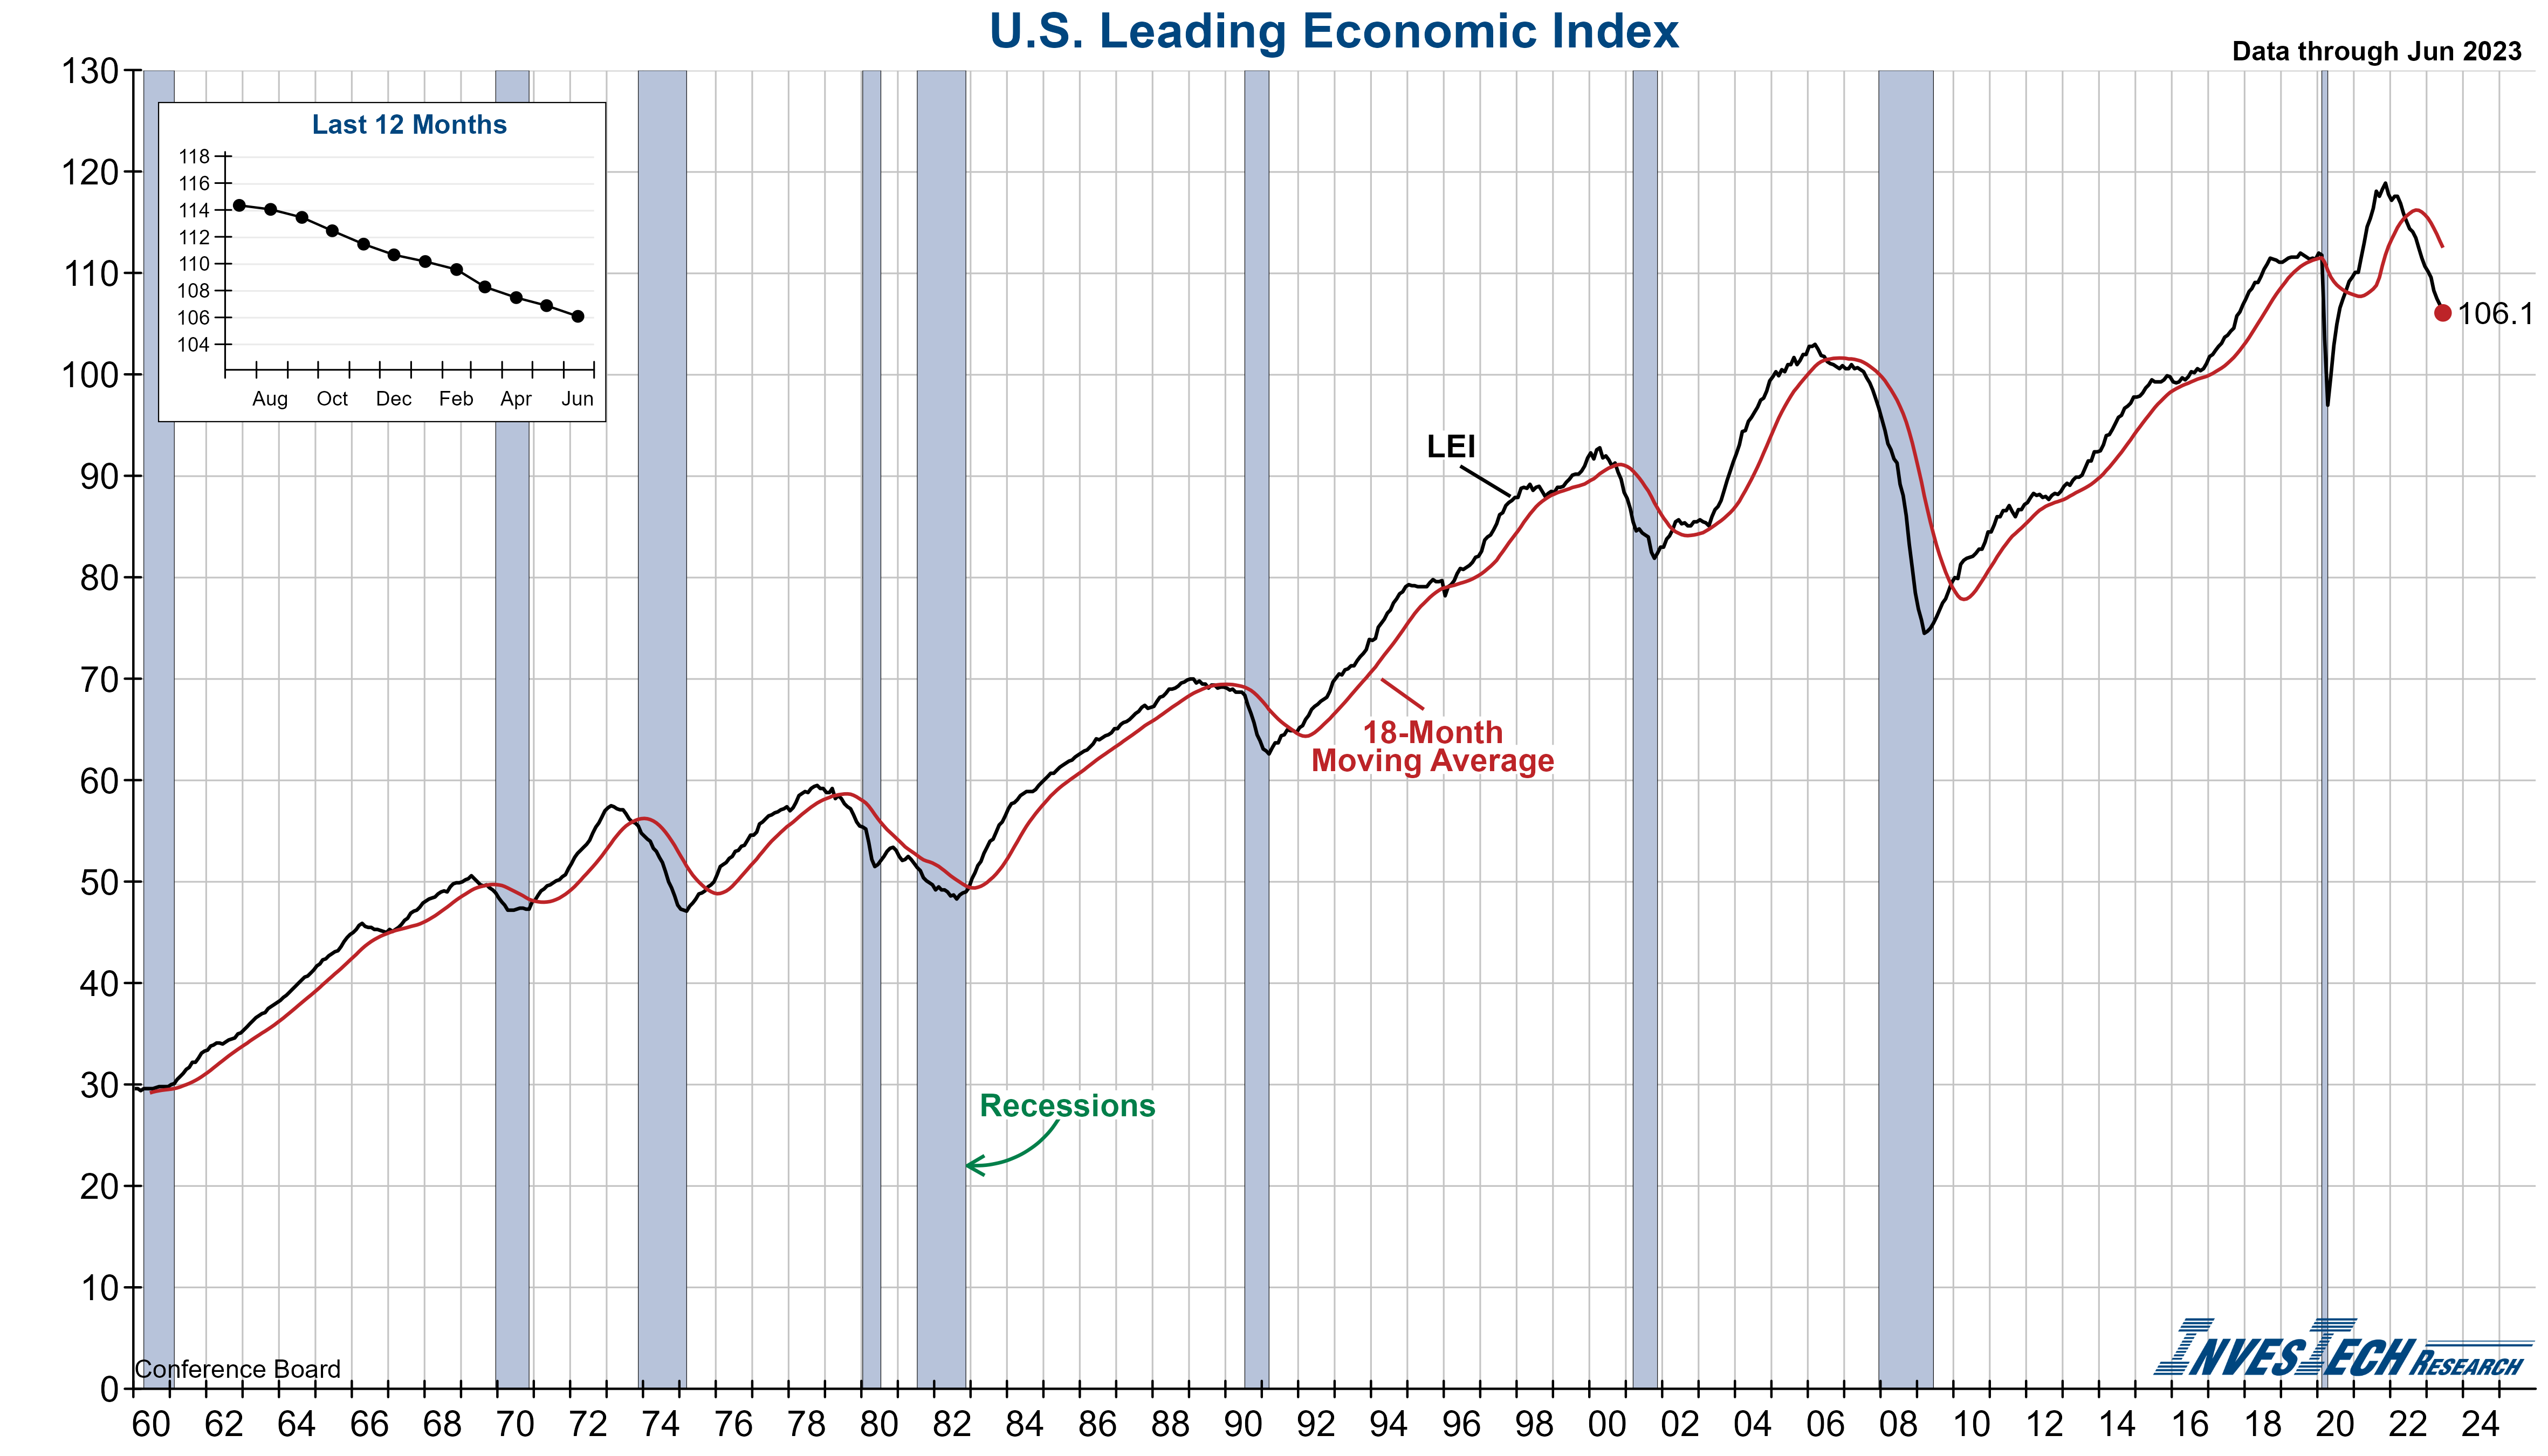 Conference Board Leading Economic Index (LEI)